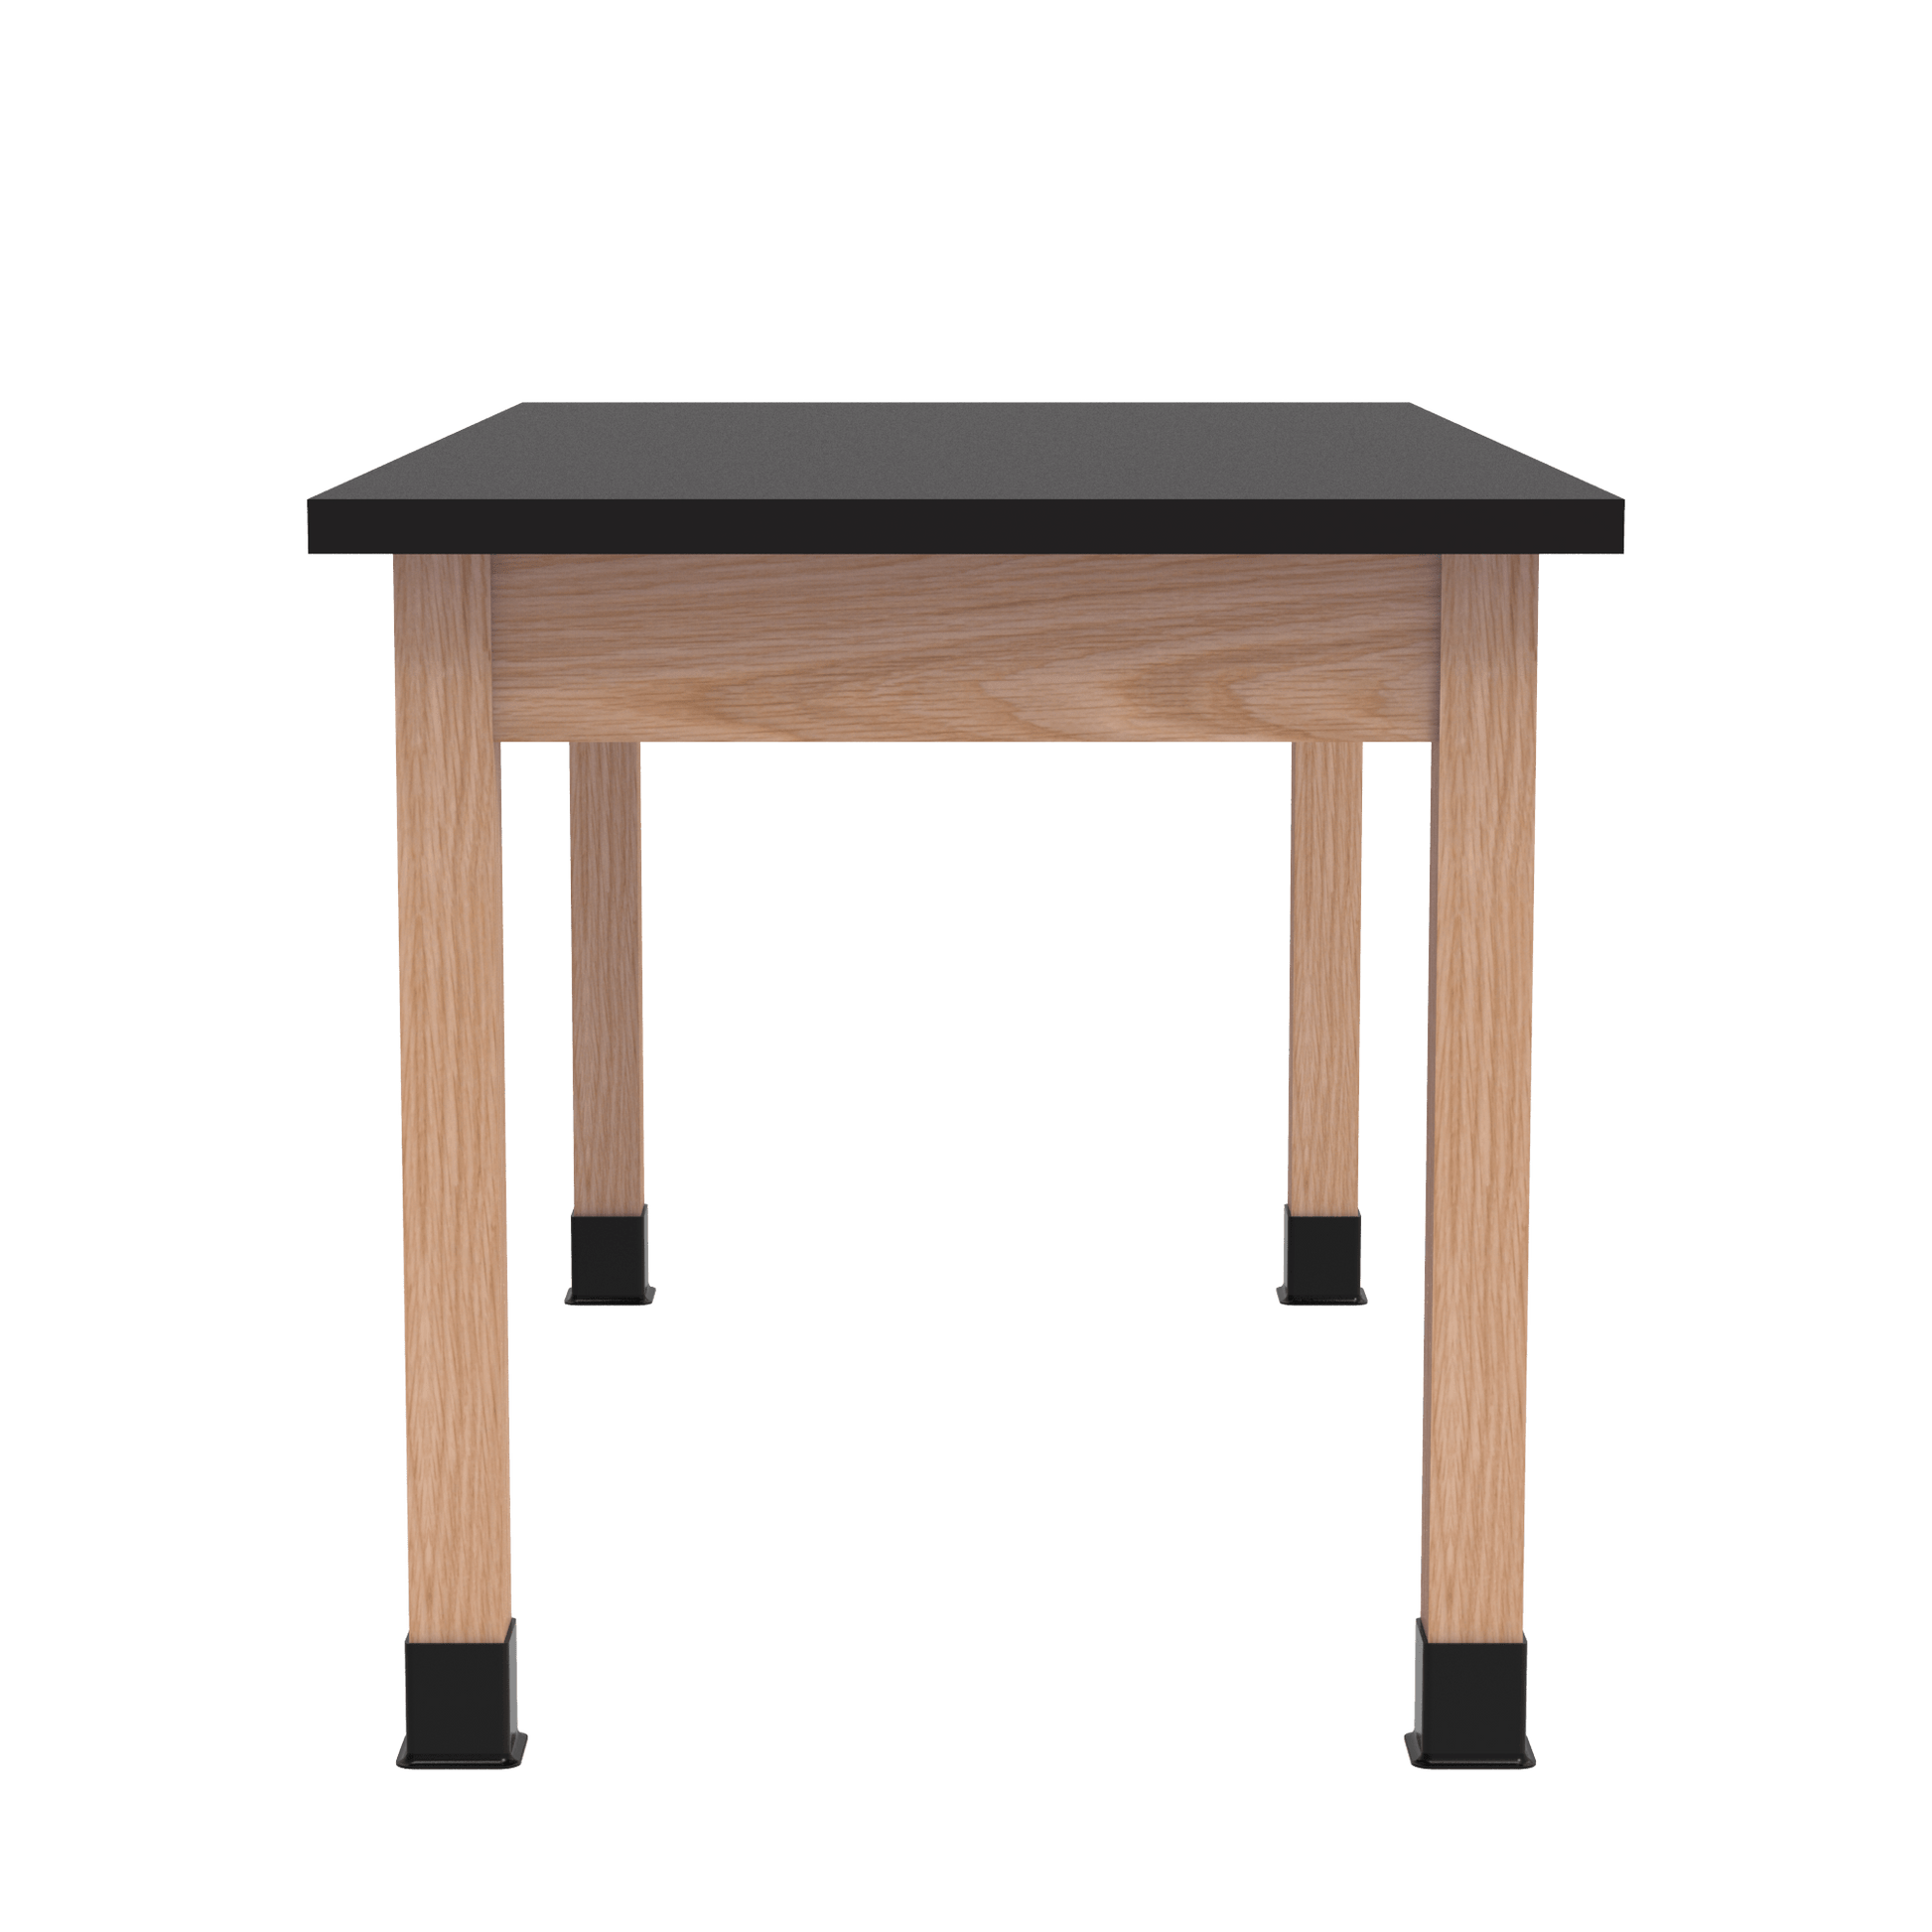 Diversified Woodcrafts Science Table w/ Book Compartment - 48" W x 21" D - Solid Oak Frame and Adjustable Glides - SchoolOutlet